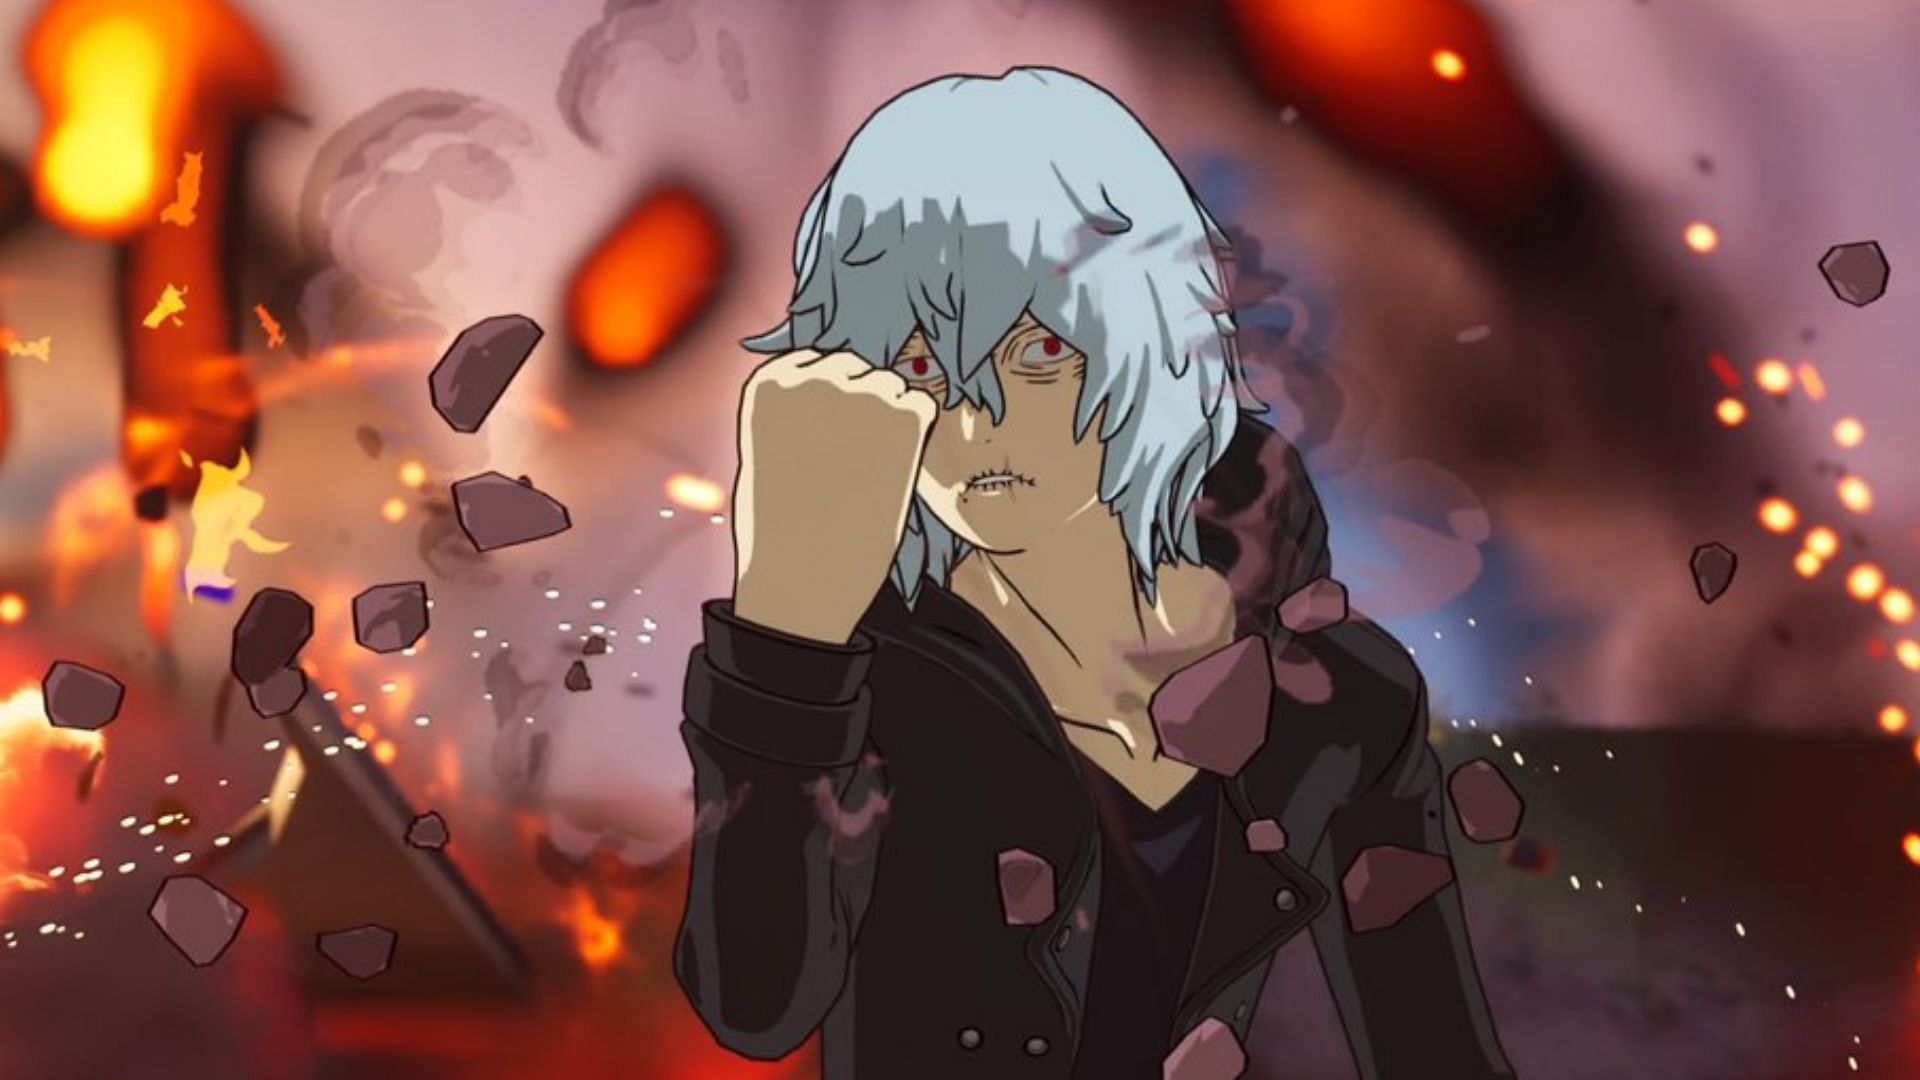 &ldquo;A bit graphic for younger audiences&rdquo;: Fortnite community reacts to Tomura Shigaraki missing his iconic hands from My Hero Academia